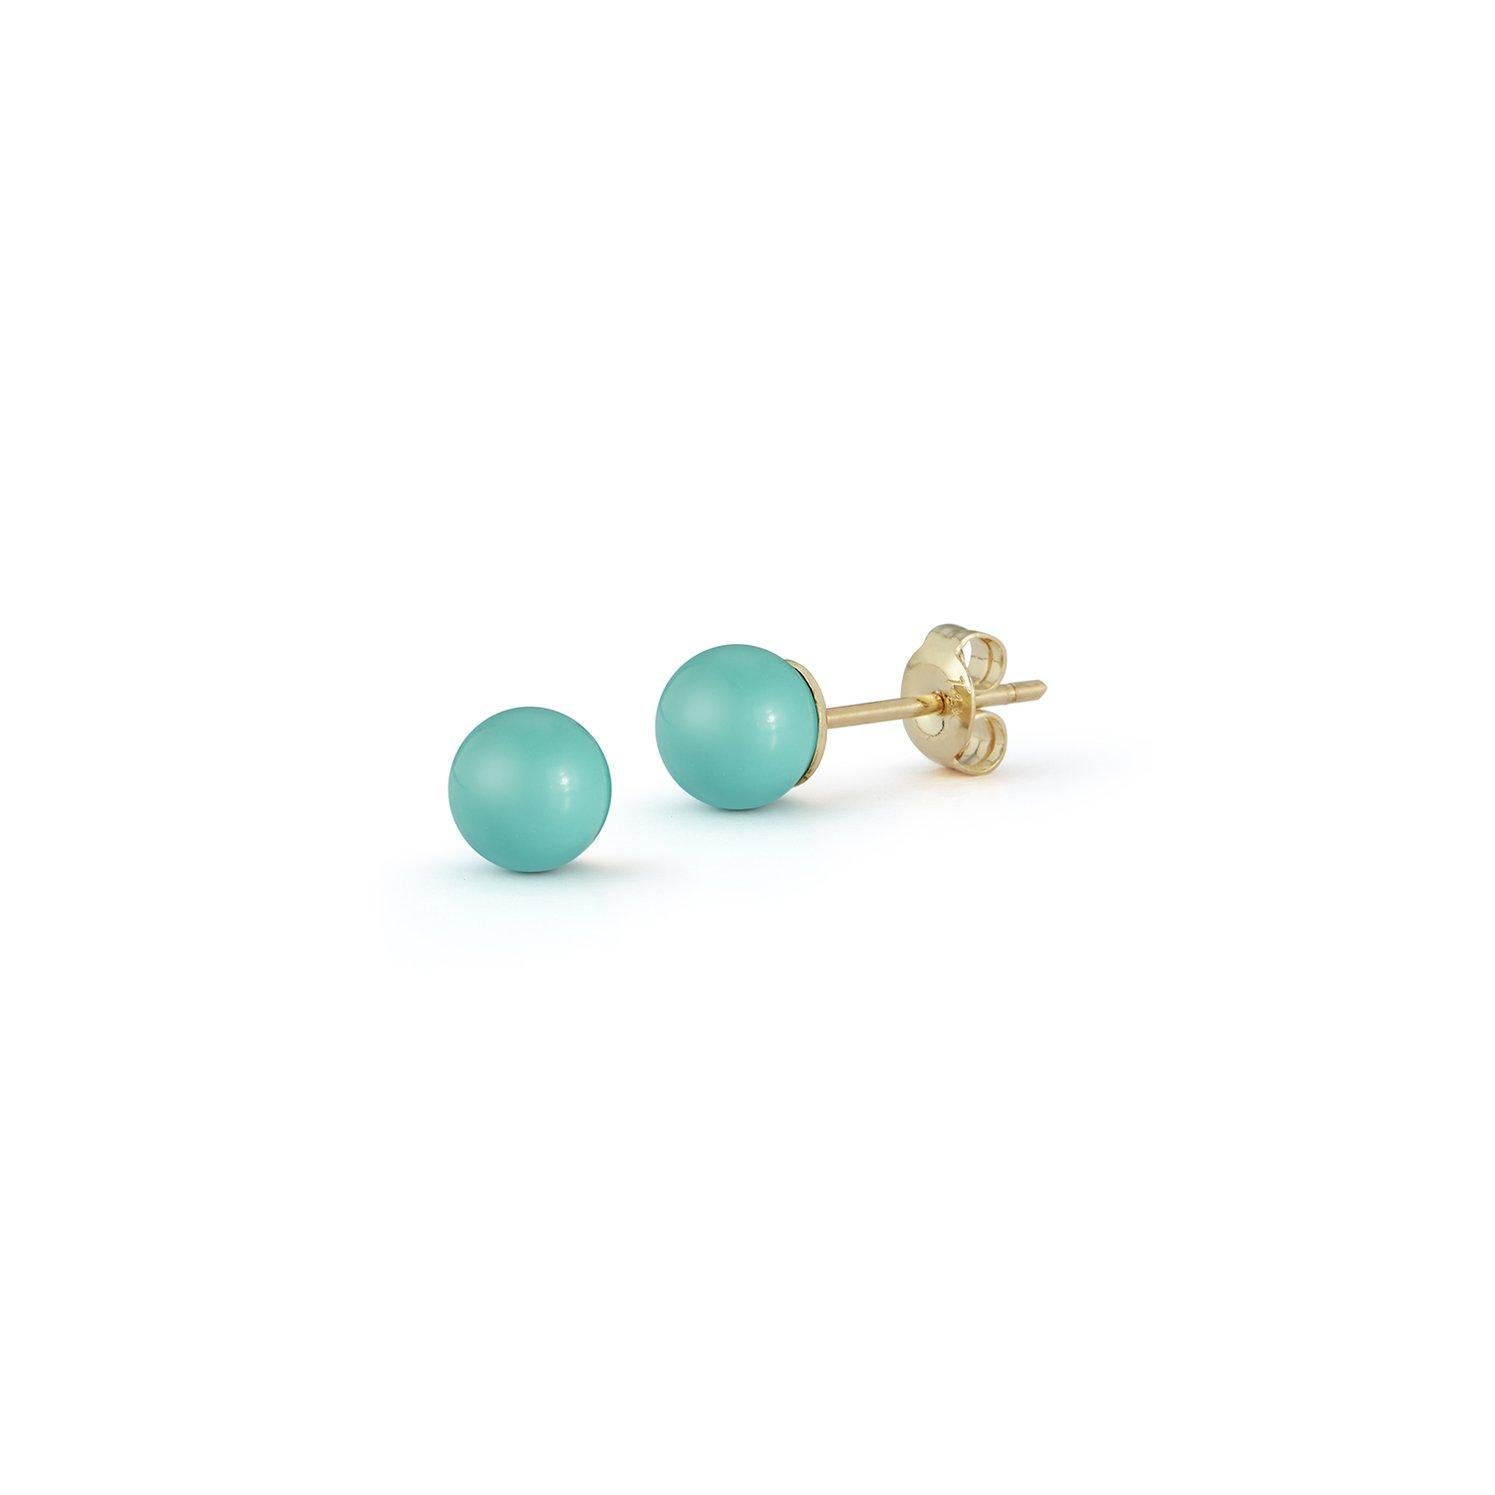 A timeless classic, our turquoise studs are a must have and the perfect way to add a bit of color. Made in New York of solid 14kt Gold and beautiful turquoise.
